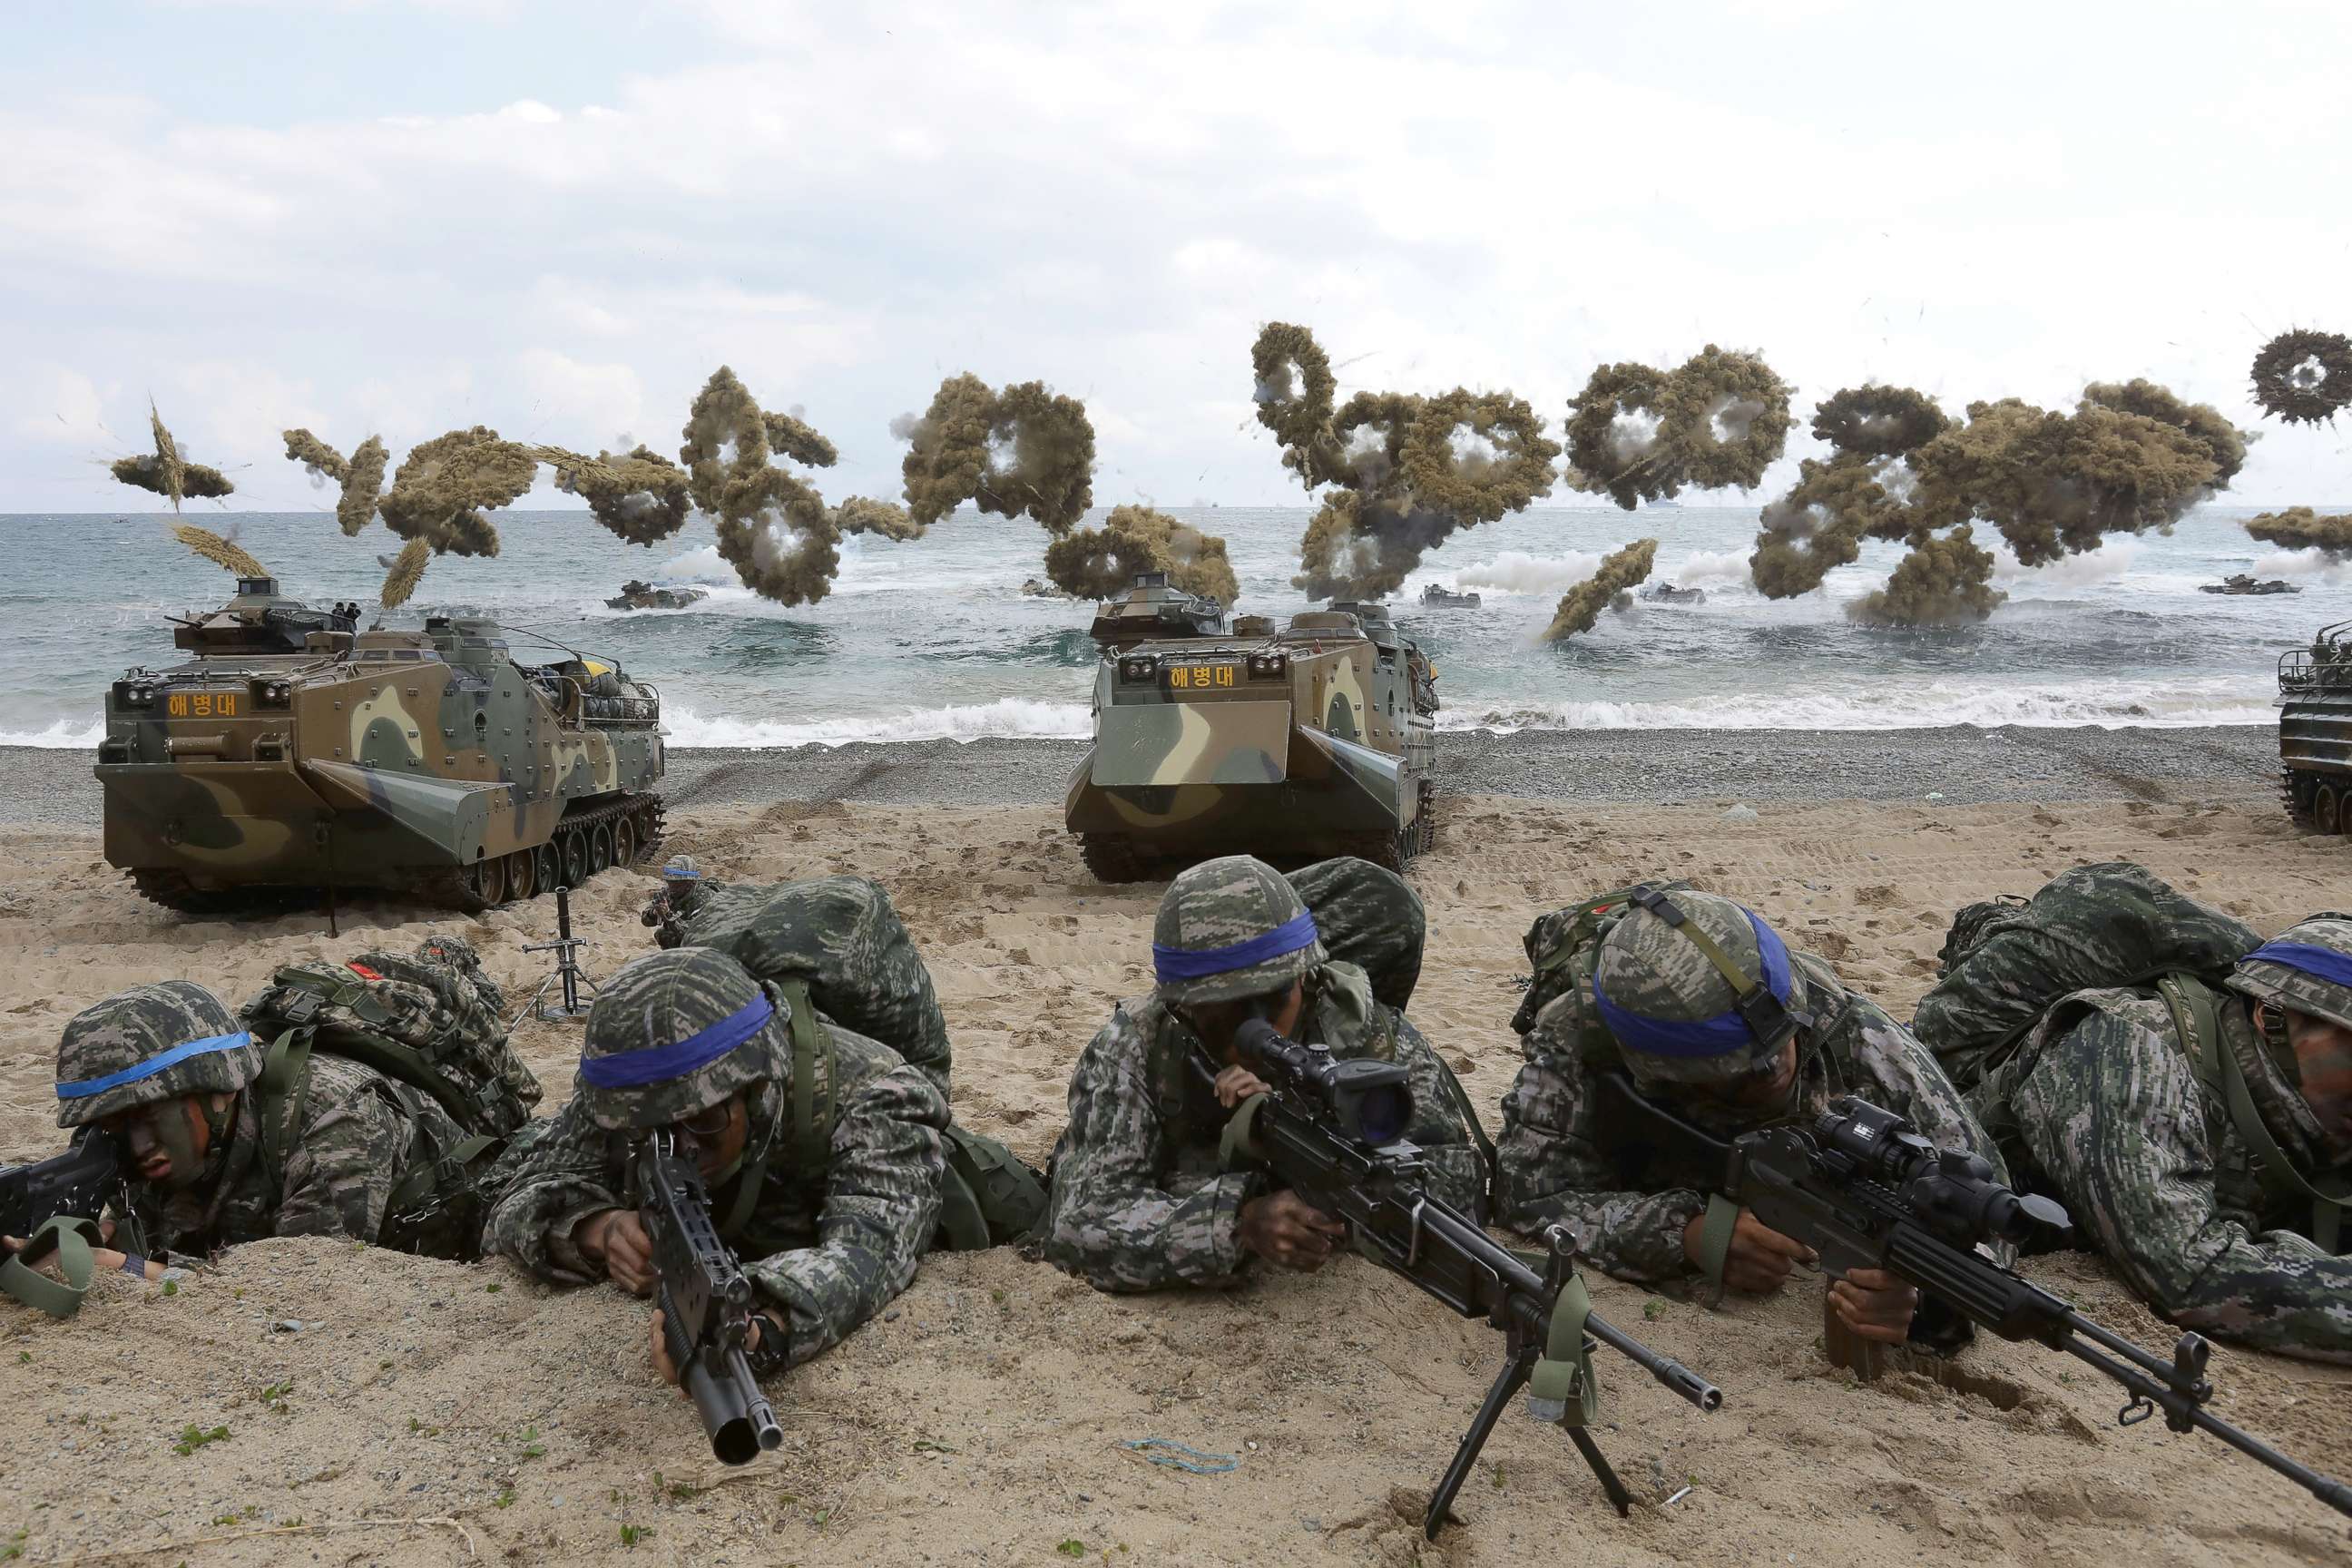 PHOTO: South Korean marines participate in landing operation referred to as Foal Eagle joint military exercise with U.S. troops Pohang seashore, on April 2, 2017, in Pohang, South Korea.